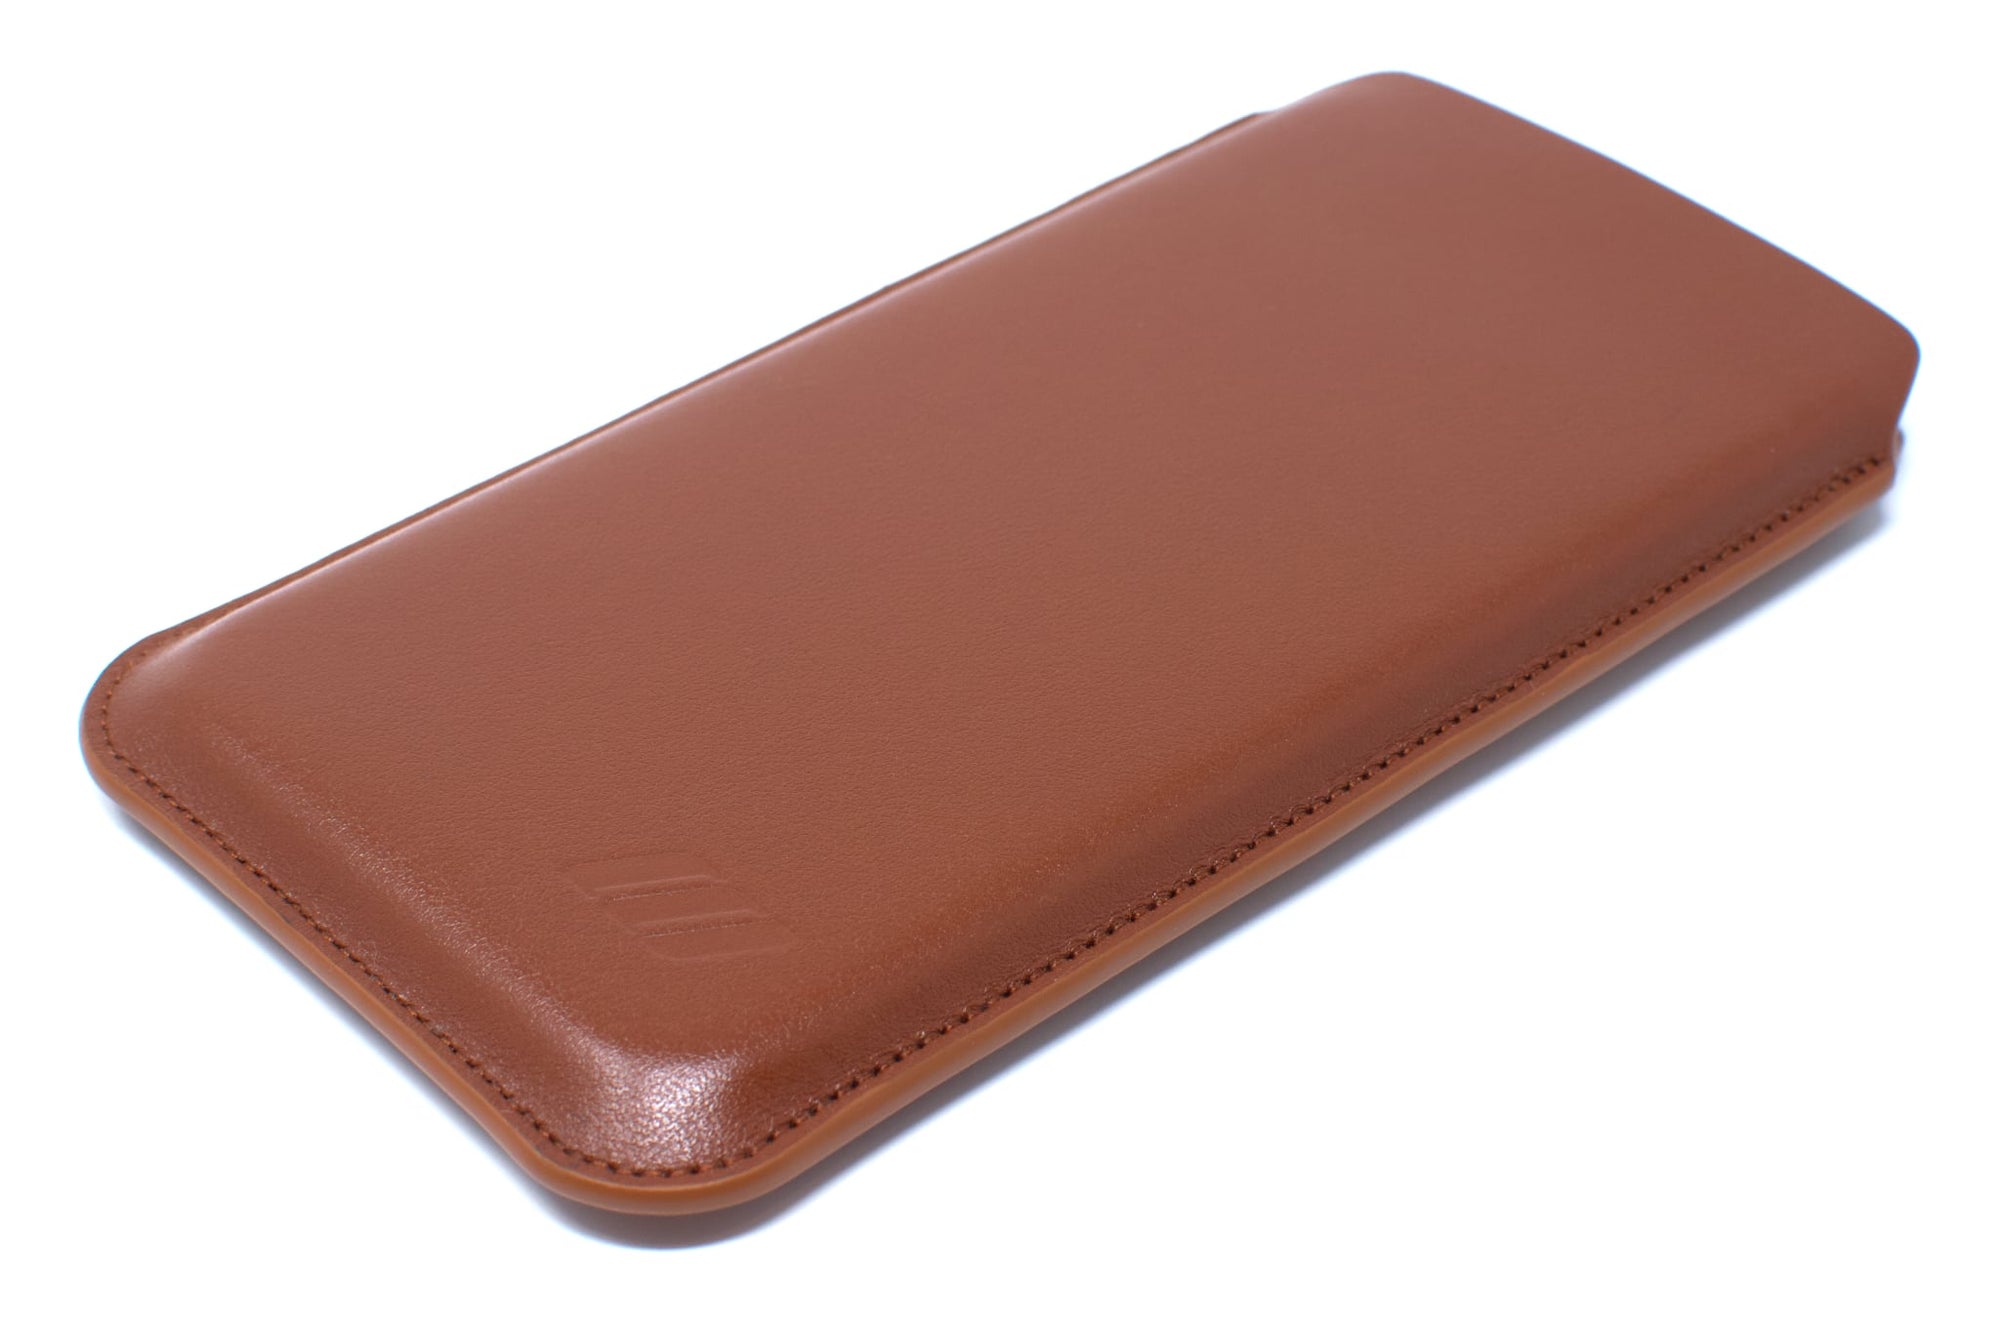 Apple iPhone 13 Pro Leather Sleeve Case - Skinny Fit - Acorn Brown